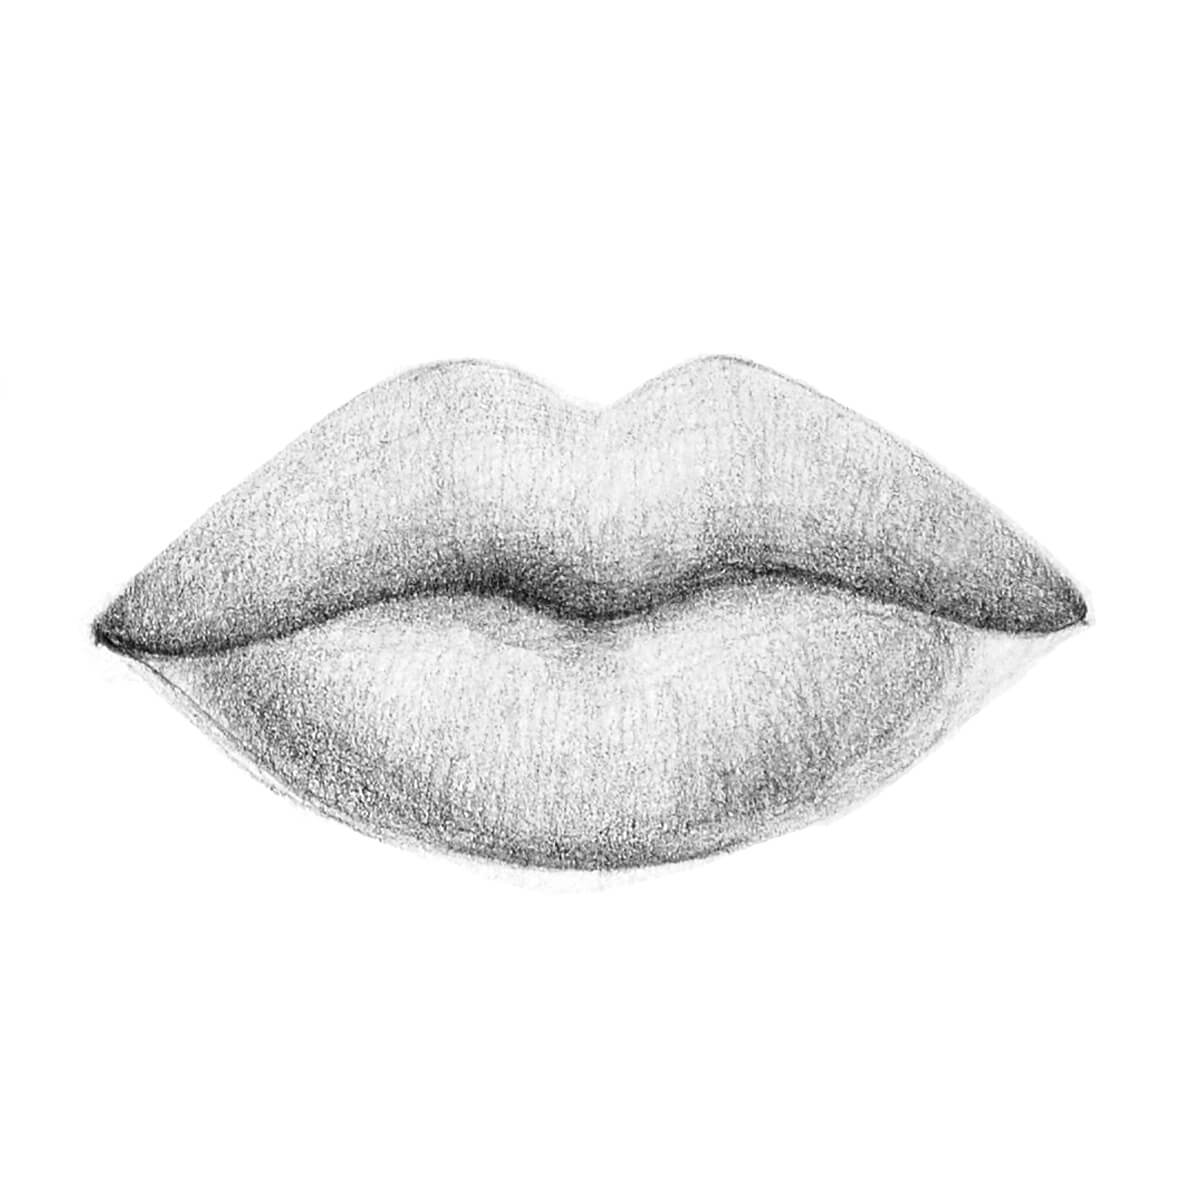 lips drawing easy - step 4